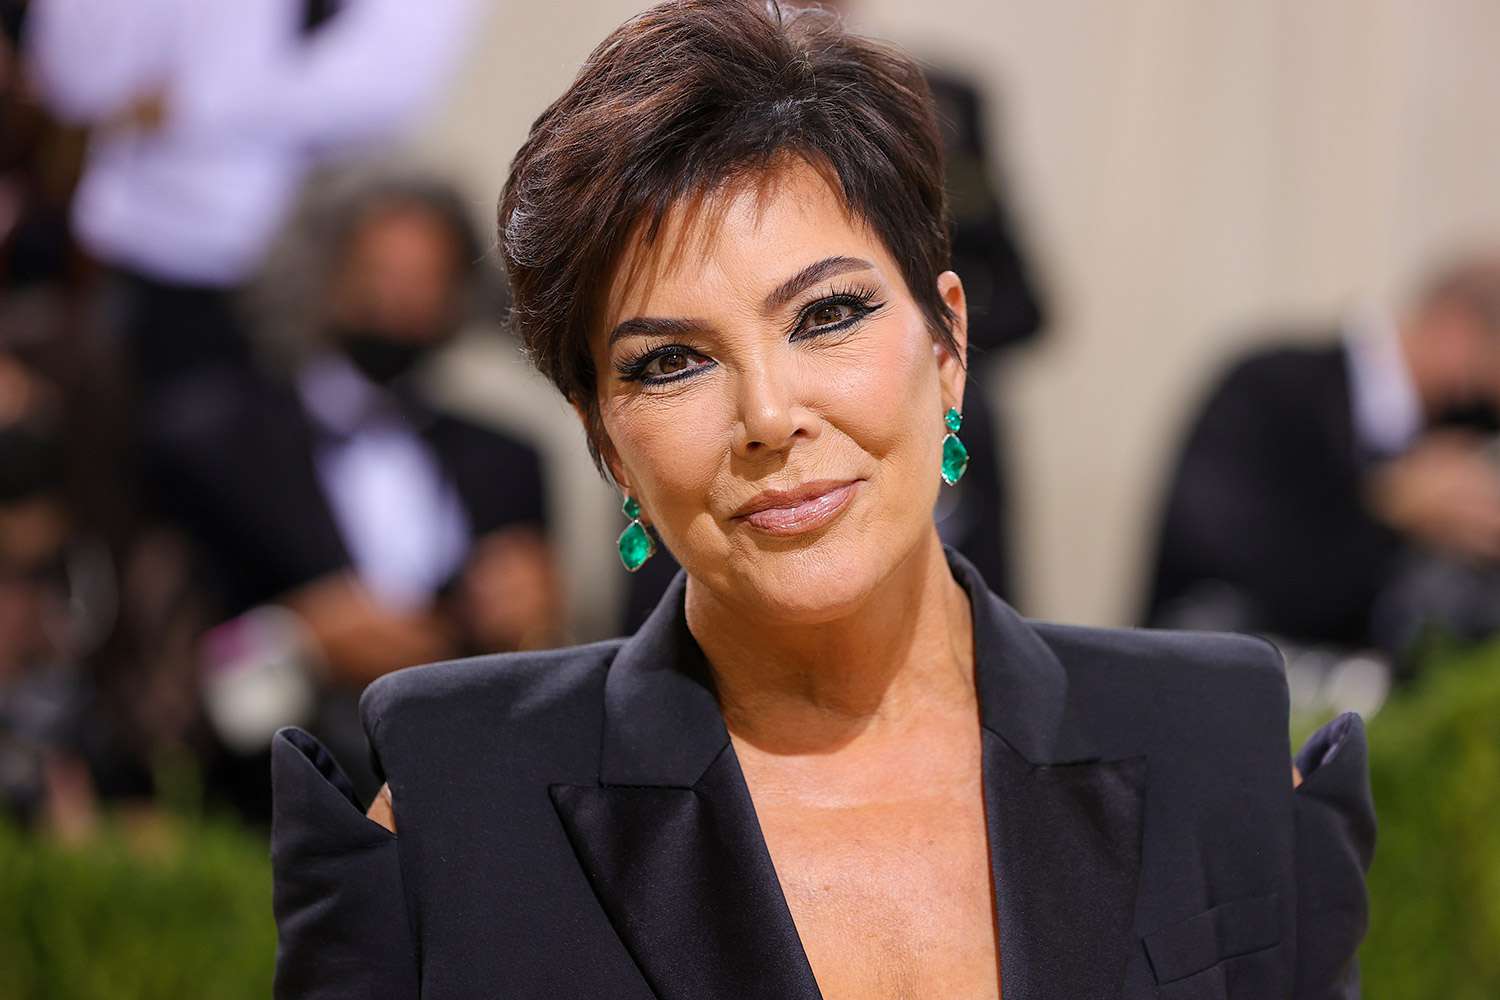 Kris Jenner Reflects on Having 'Greatest Pregnancies' with All 6 Kids